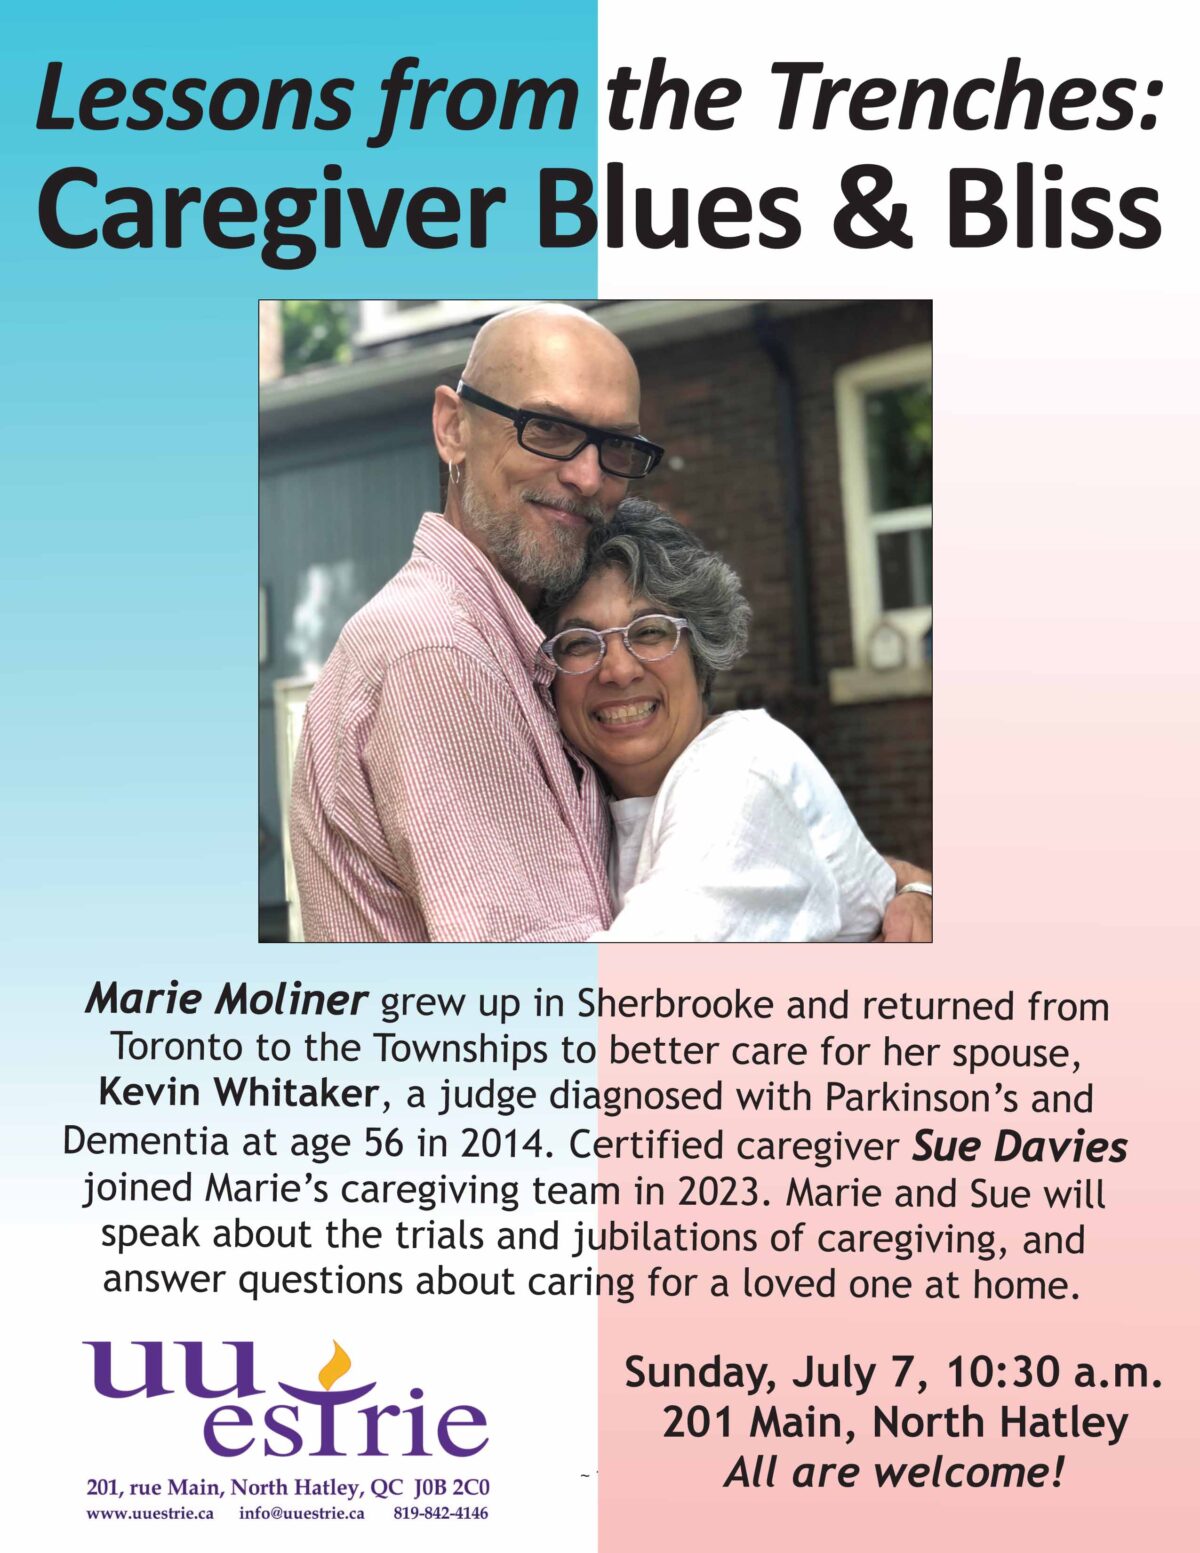 Sunday, July 7, 10:30 a.m. Lessons from the Trenches: Caregiver Blues and Bliss